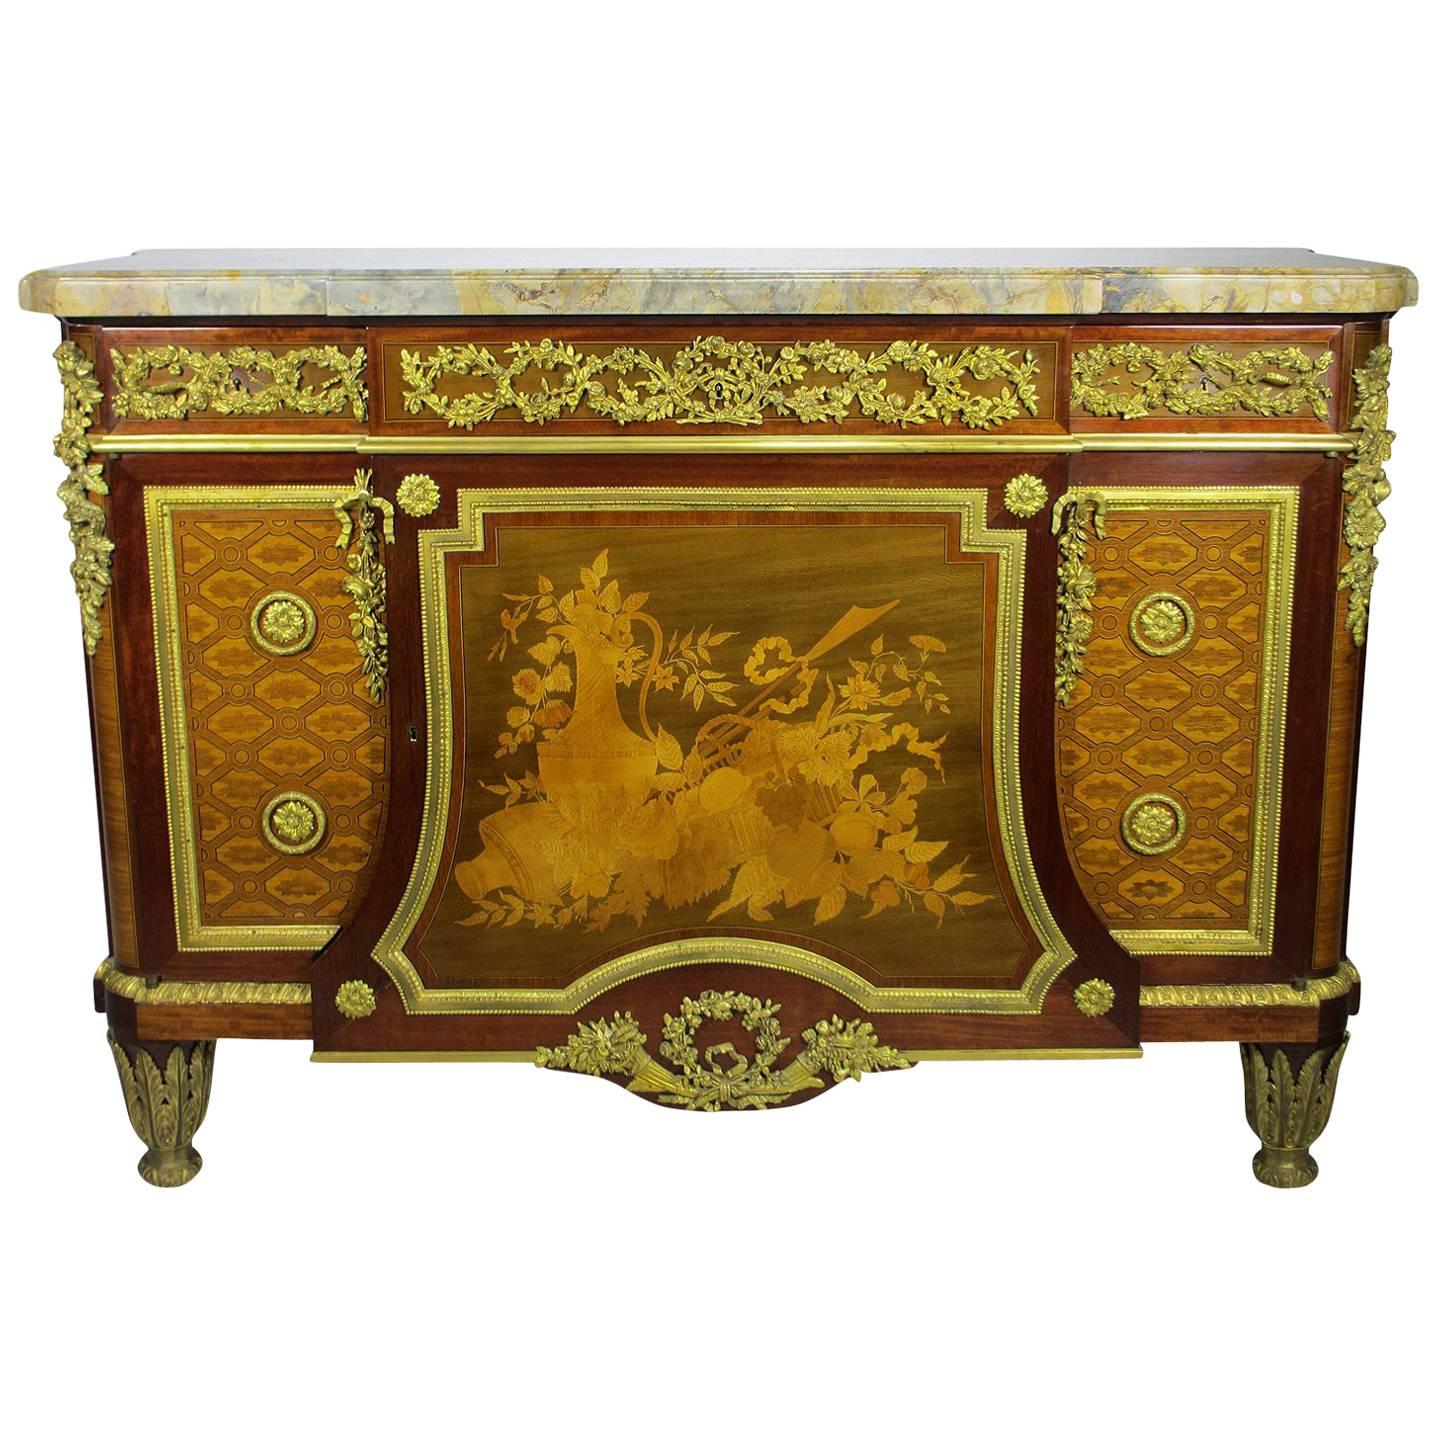 Fine French 19th Century Louis XVI Style Gilt-Bronze Mounted Marquetry Commode For Sale